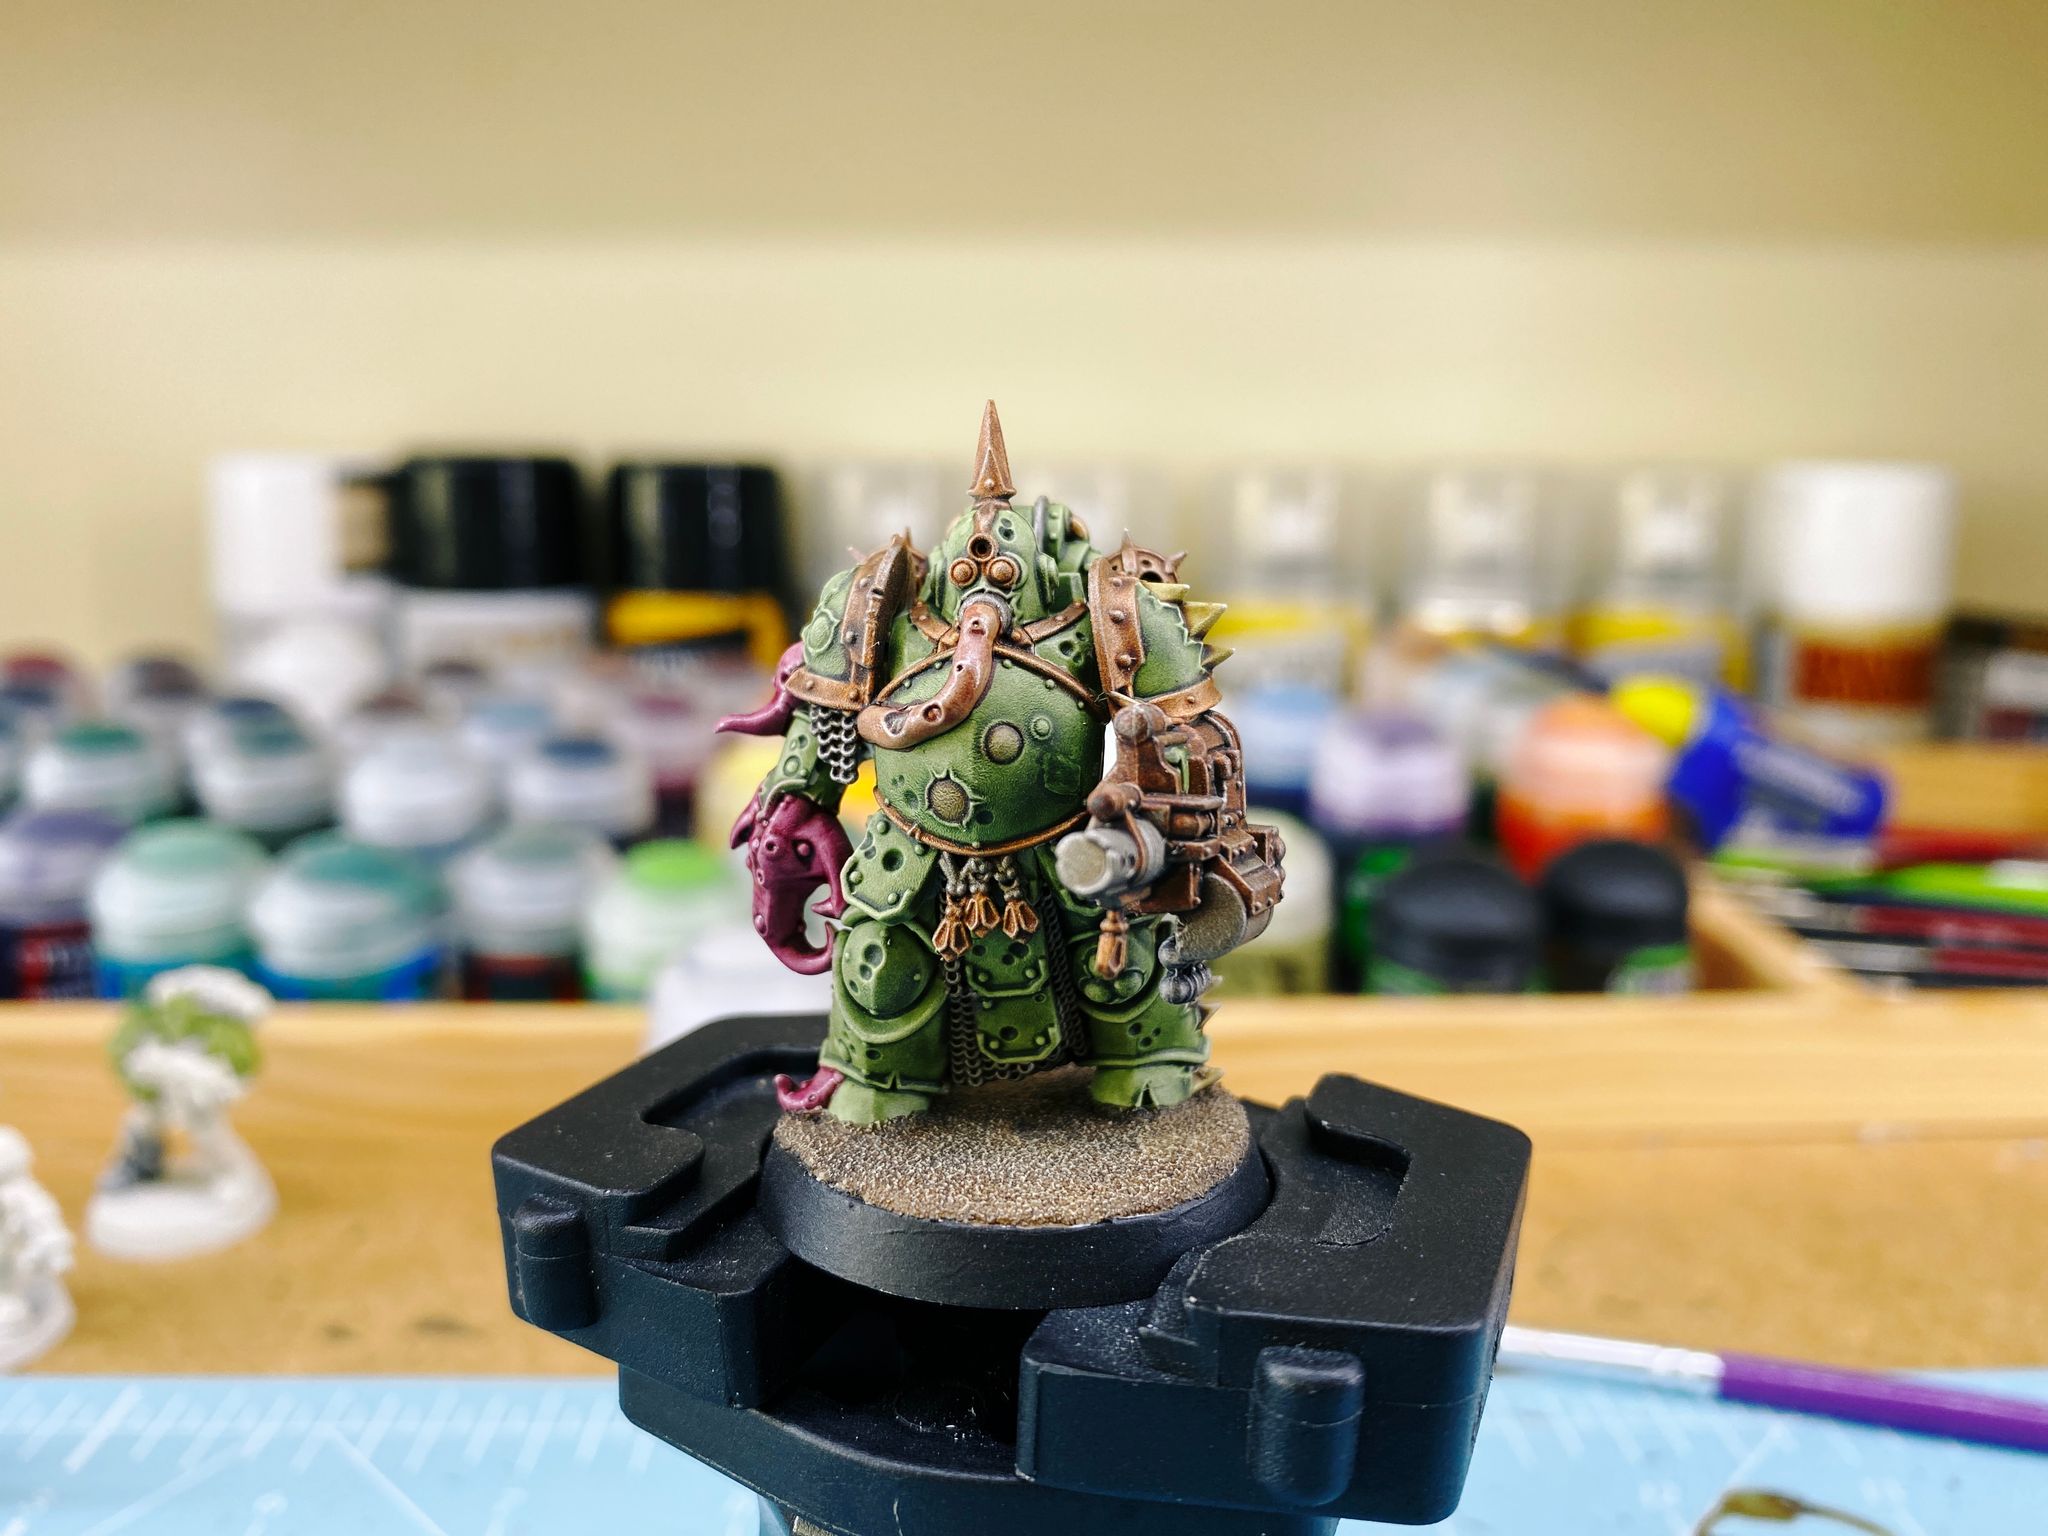 A photo of a Plague Marine from Warhammer 40,000. He's a big green lumbering armoured thing, he's got a grenade launcher-looking gun in one hand, the other is a tentacle, and he's got a fleshy tube thing going into his helmet like it's supplying oxygen (it's totally not oxygen though).